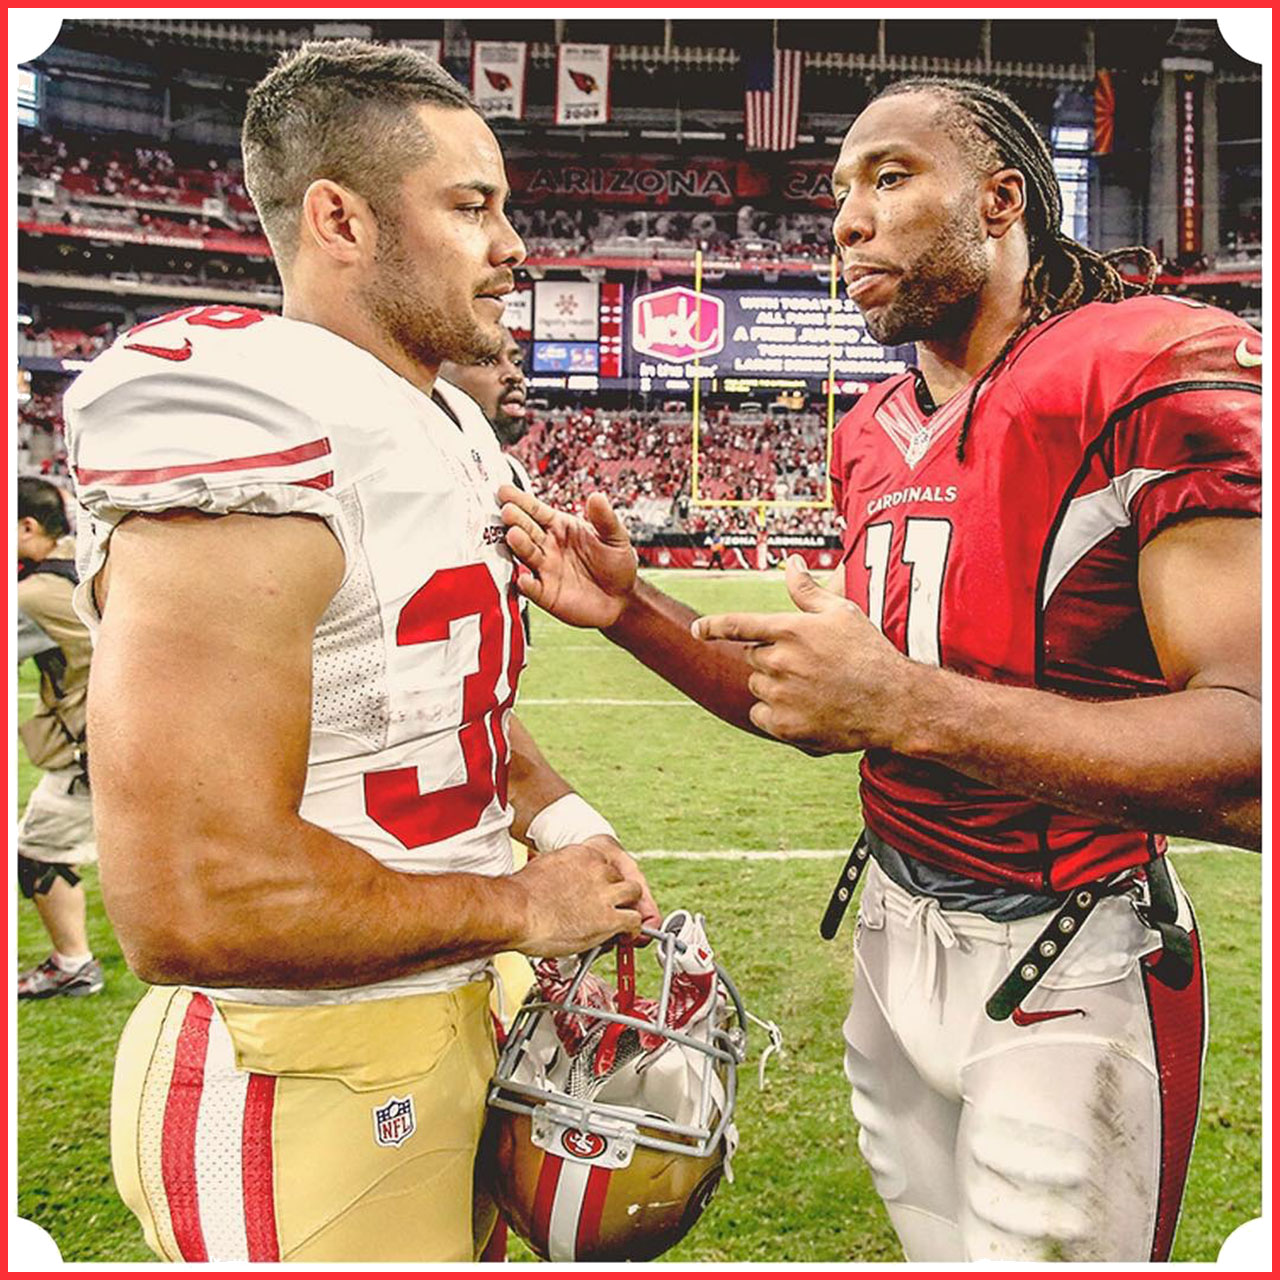 SF 49ers' Jarryd Hayne listens to some friendly advice after Arizona Cardinals game